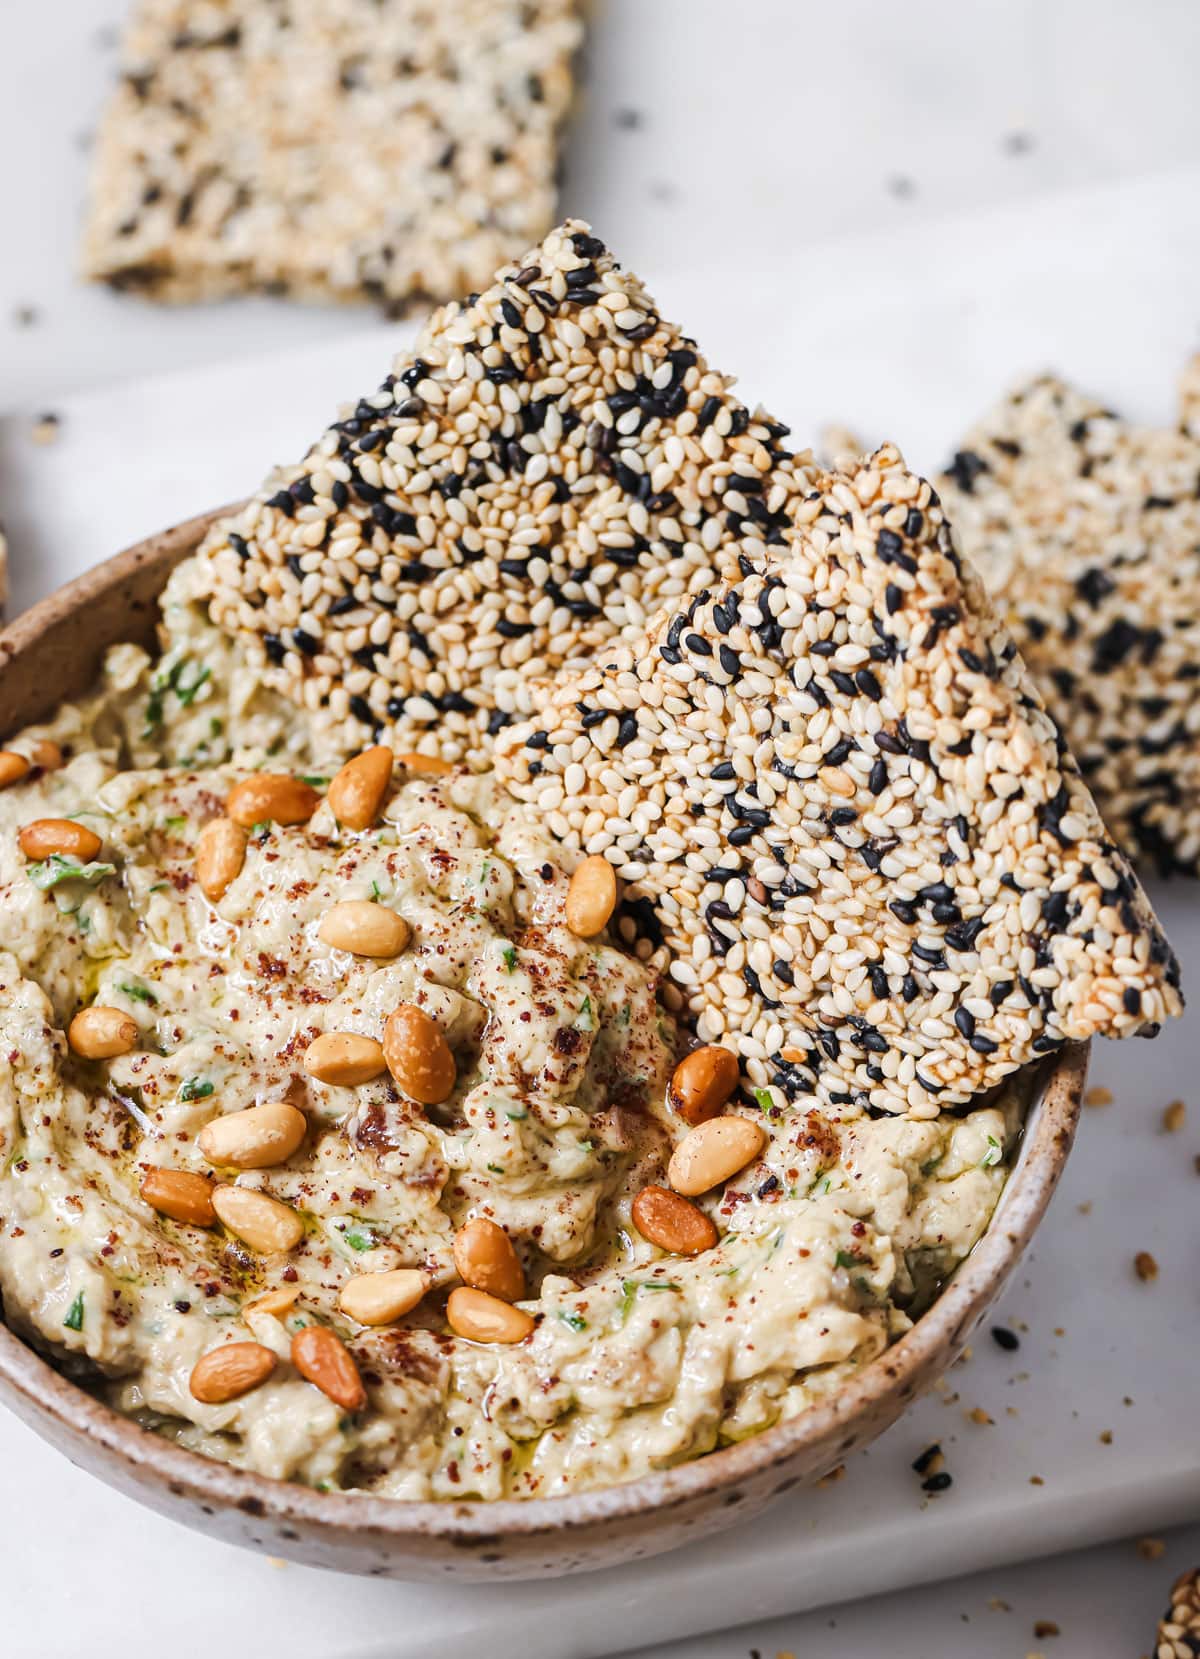 Sesame seed crackers dipped in a bowl with baba ghanoush.